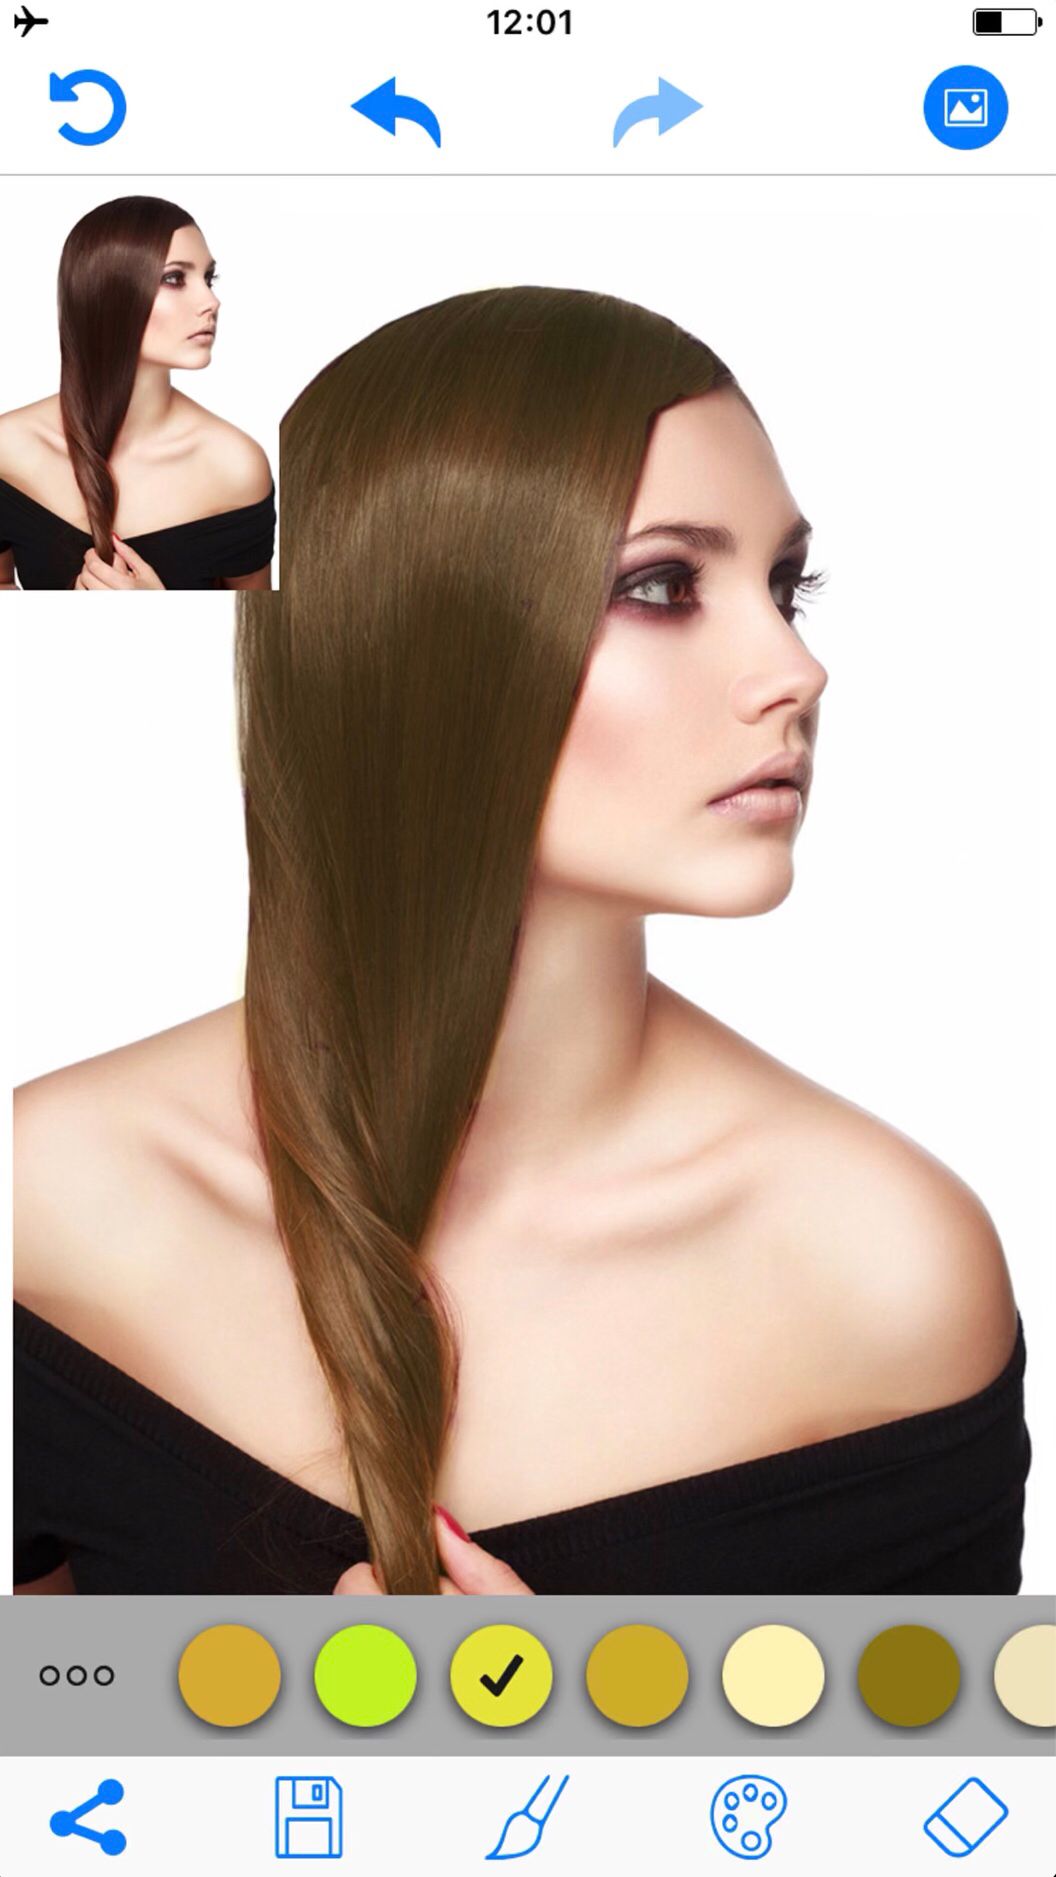 Woman Hairstyles Apk Download for Android- Latest version 2.4.7-  com.best.photo.app.womanhairstyles